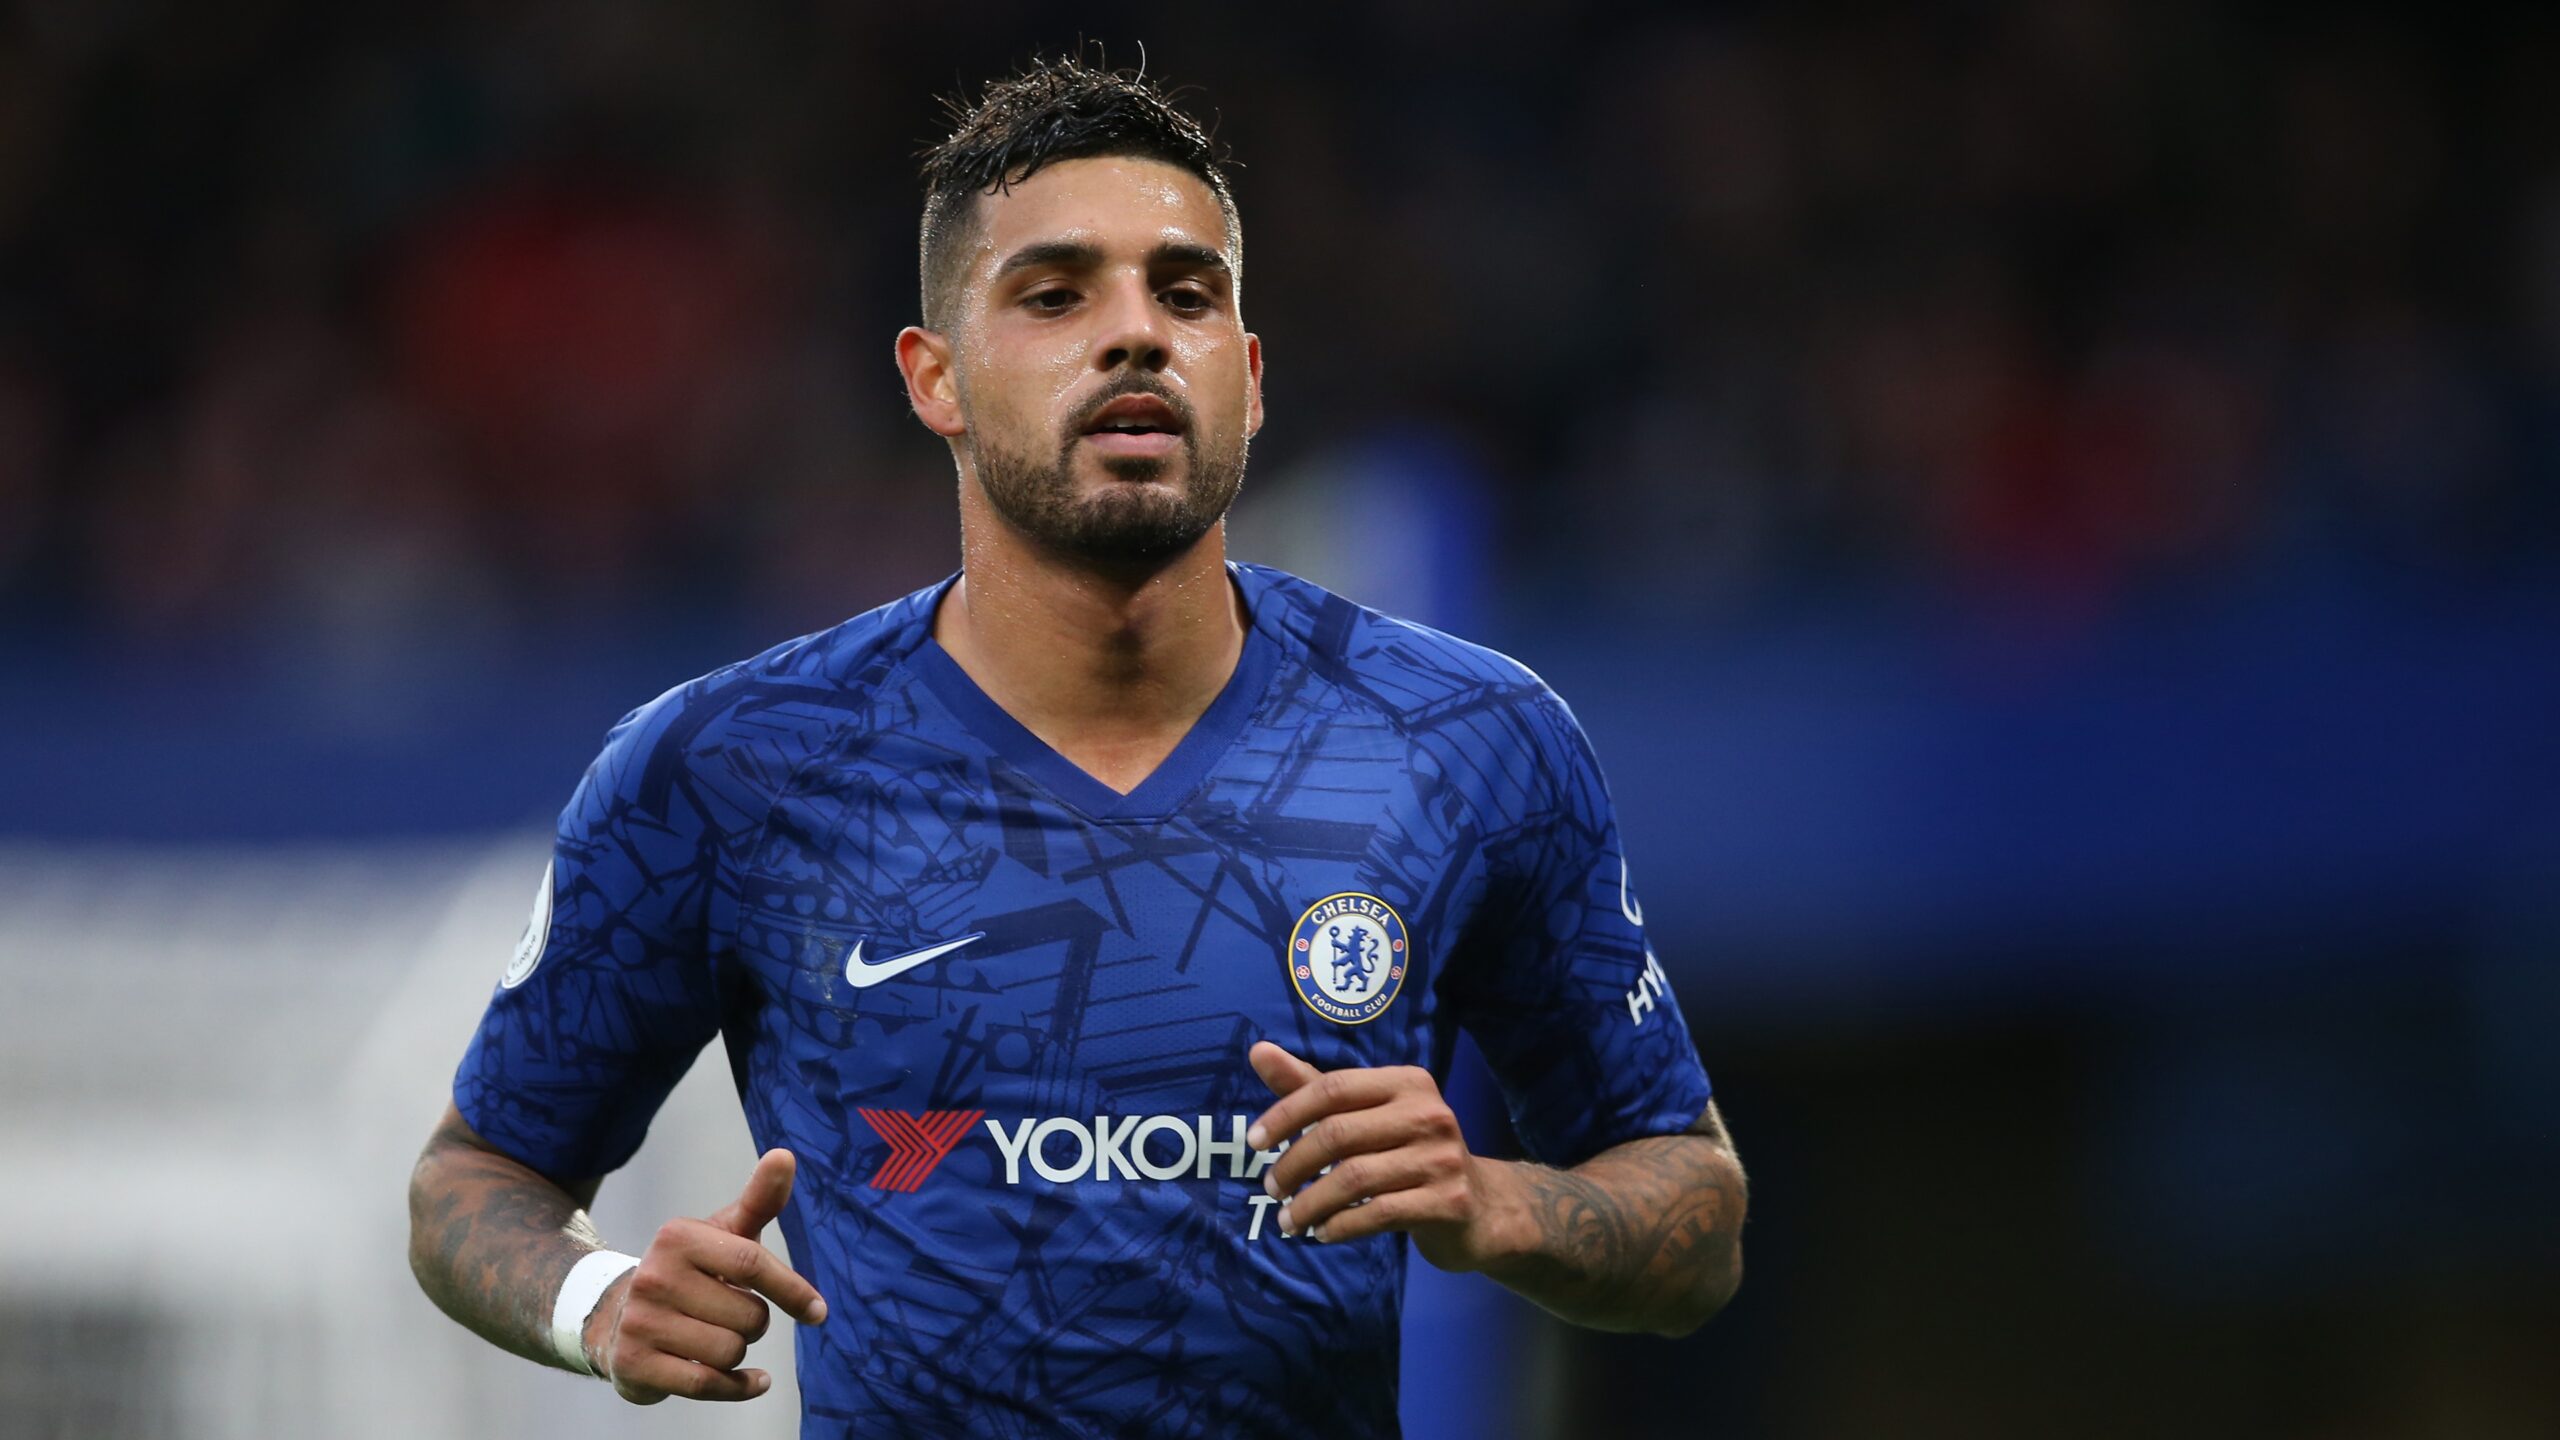 Emerson Palmieri joins West Ham from Chelsea for £15m